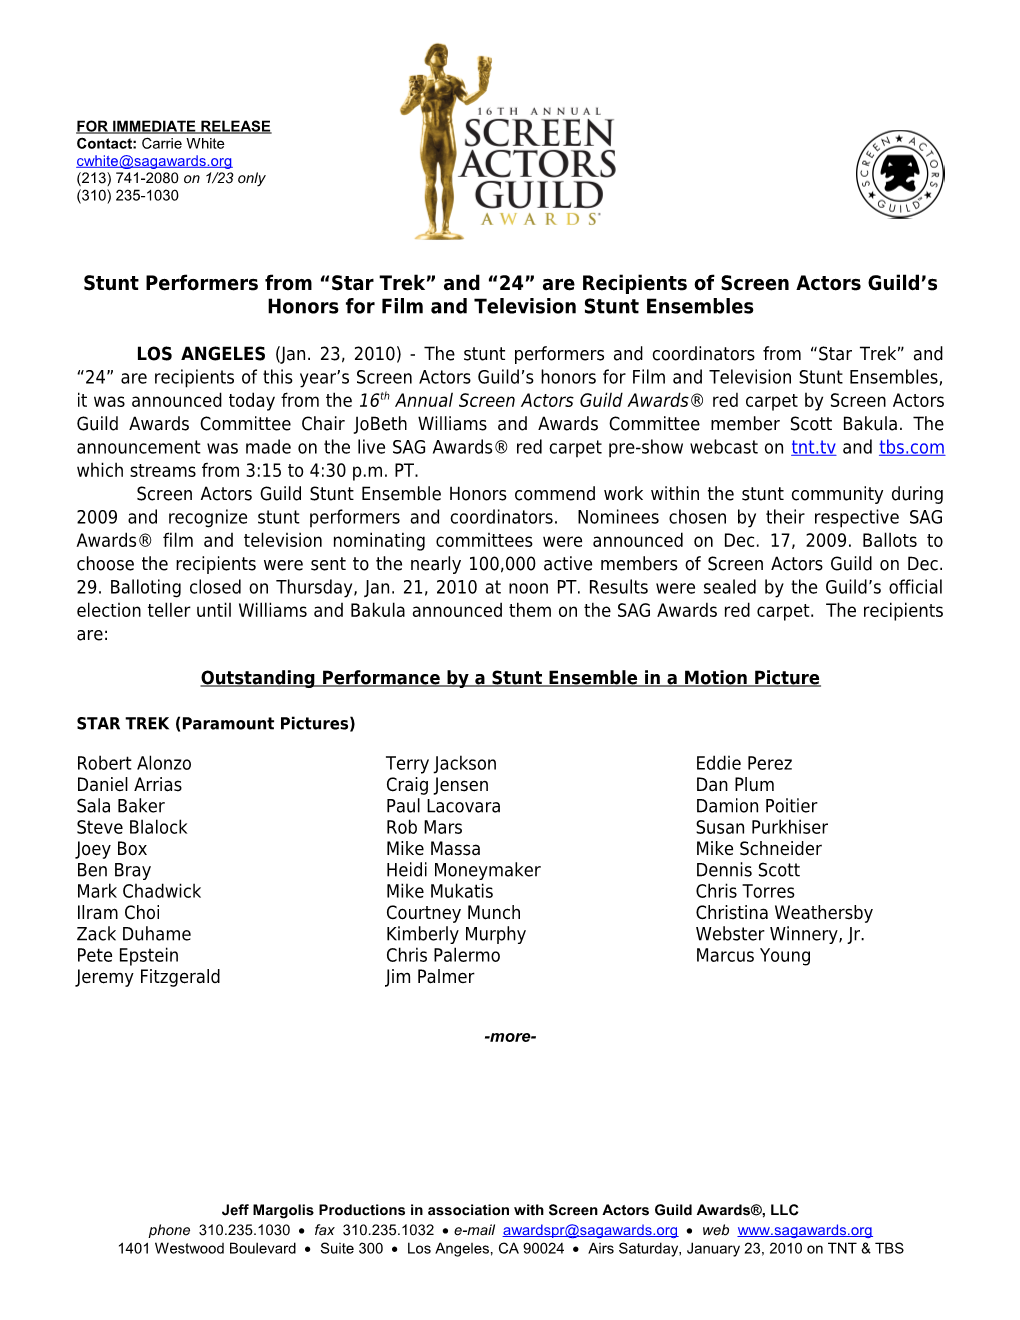 Recipients of Screen Actors Guild S Stunt Ensemble Honors Announced During Tbs.Tv And